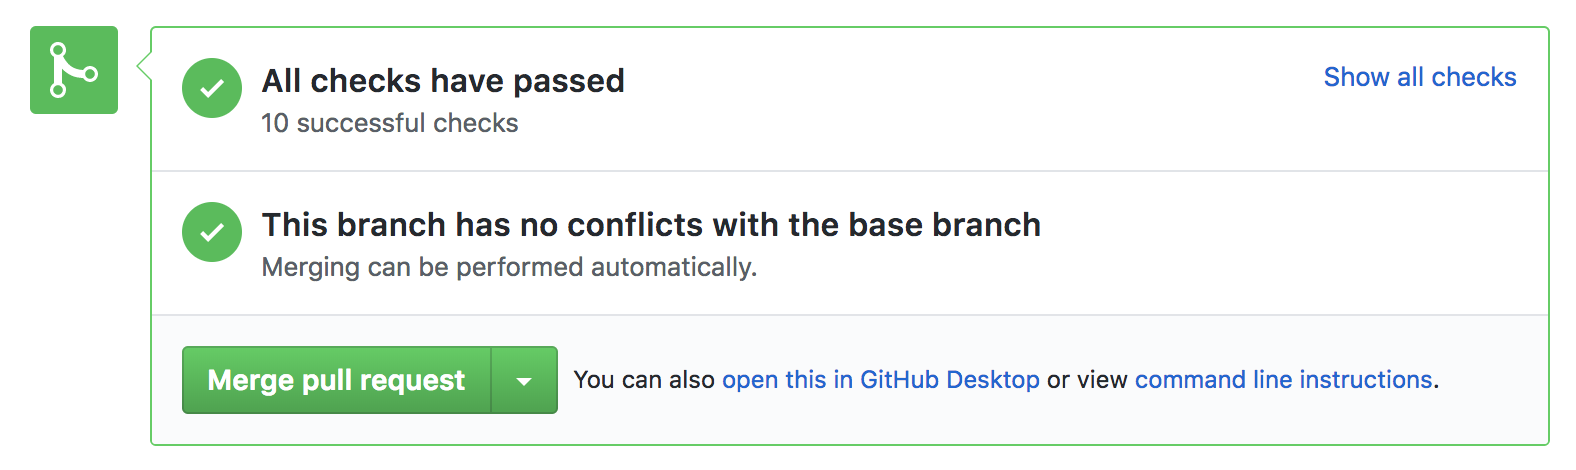 blog > images > moving-fast-at-gocardless > github-green@2x.png